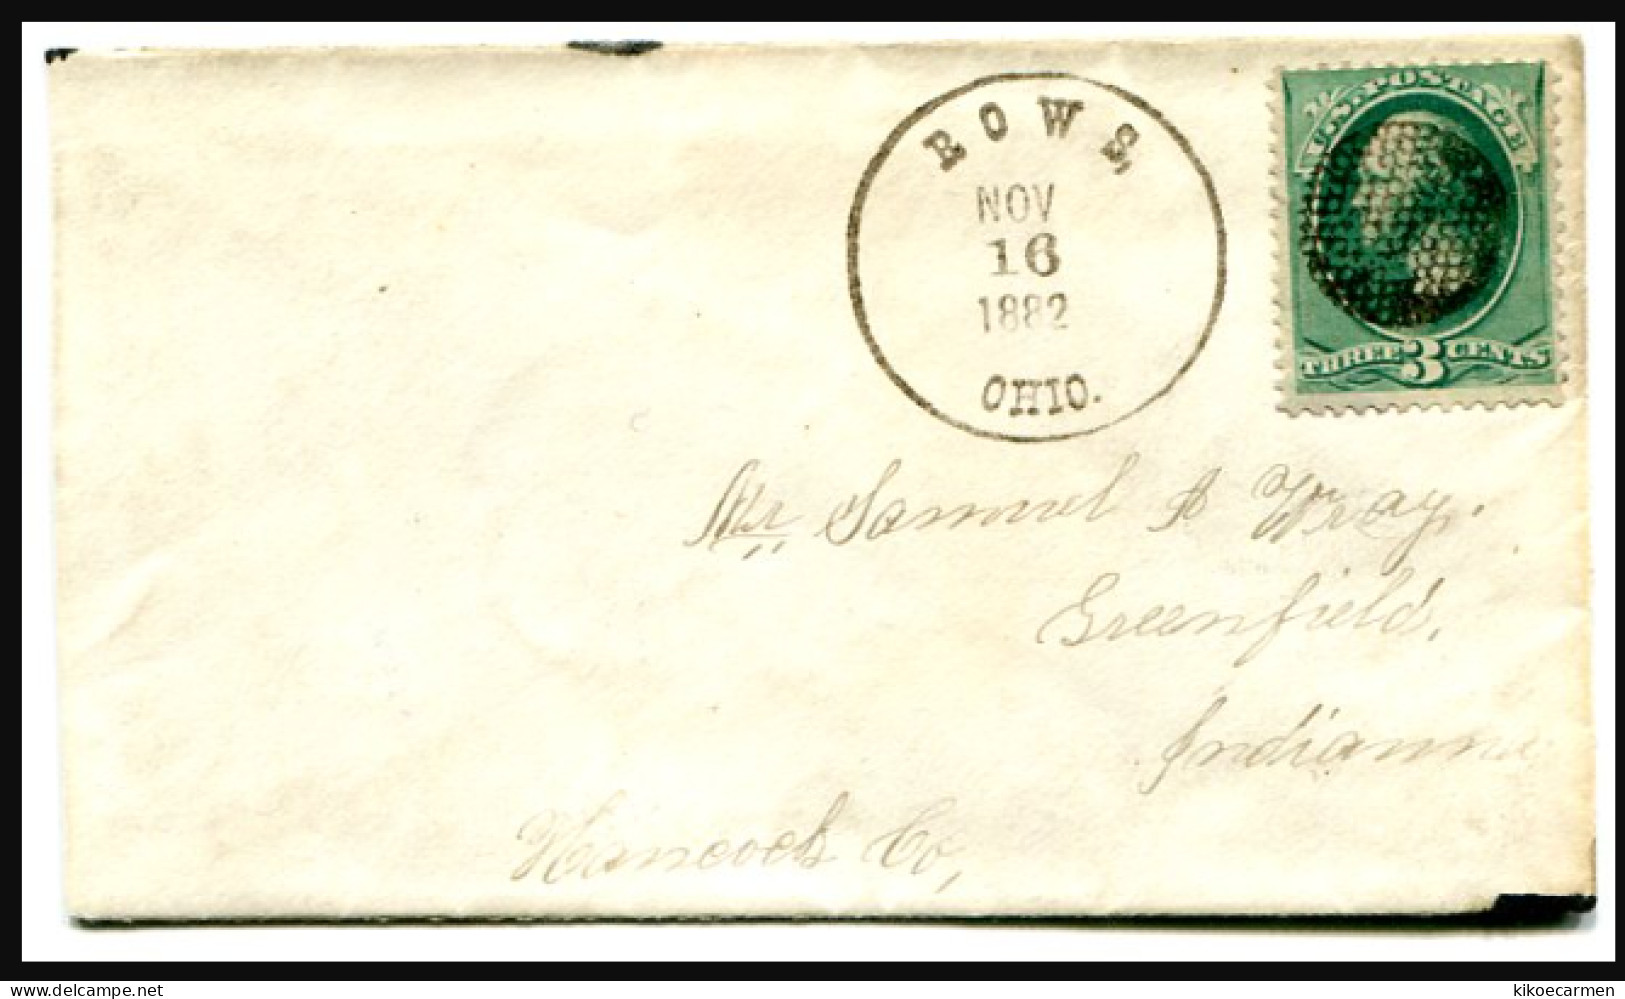 USA Fancy Cancel From Rows To Greenfield 16/11/1882 The Cancellation Reproduces The Dimbles Of A Golf Ball - Golf